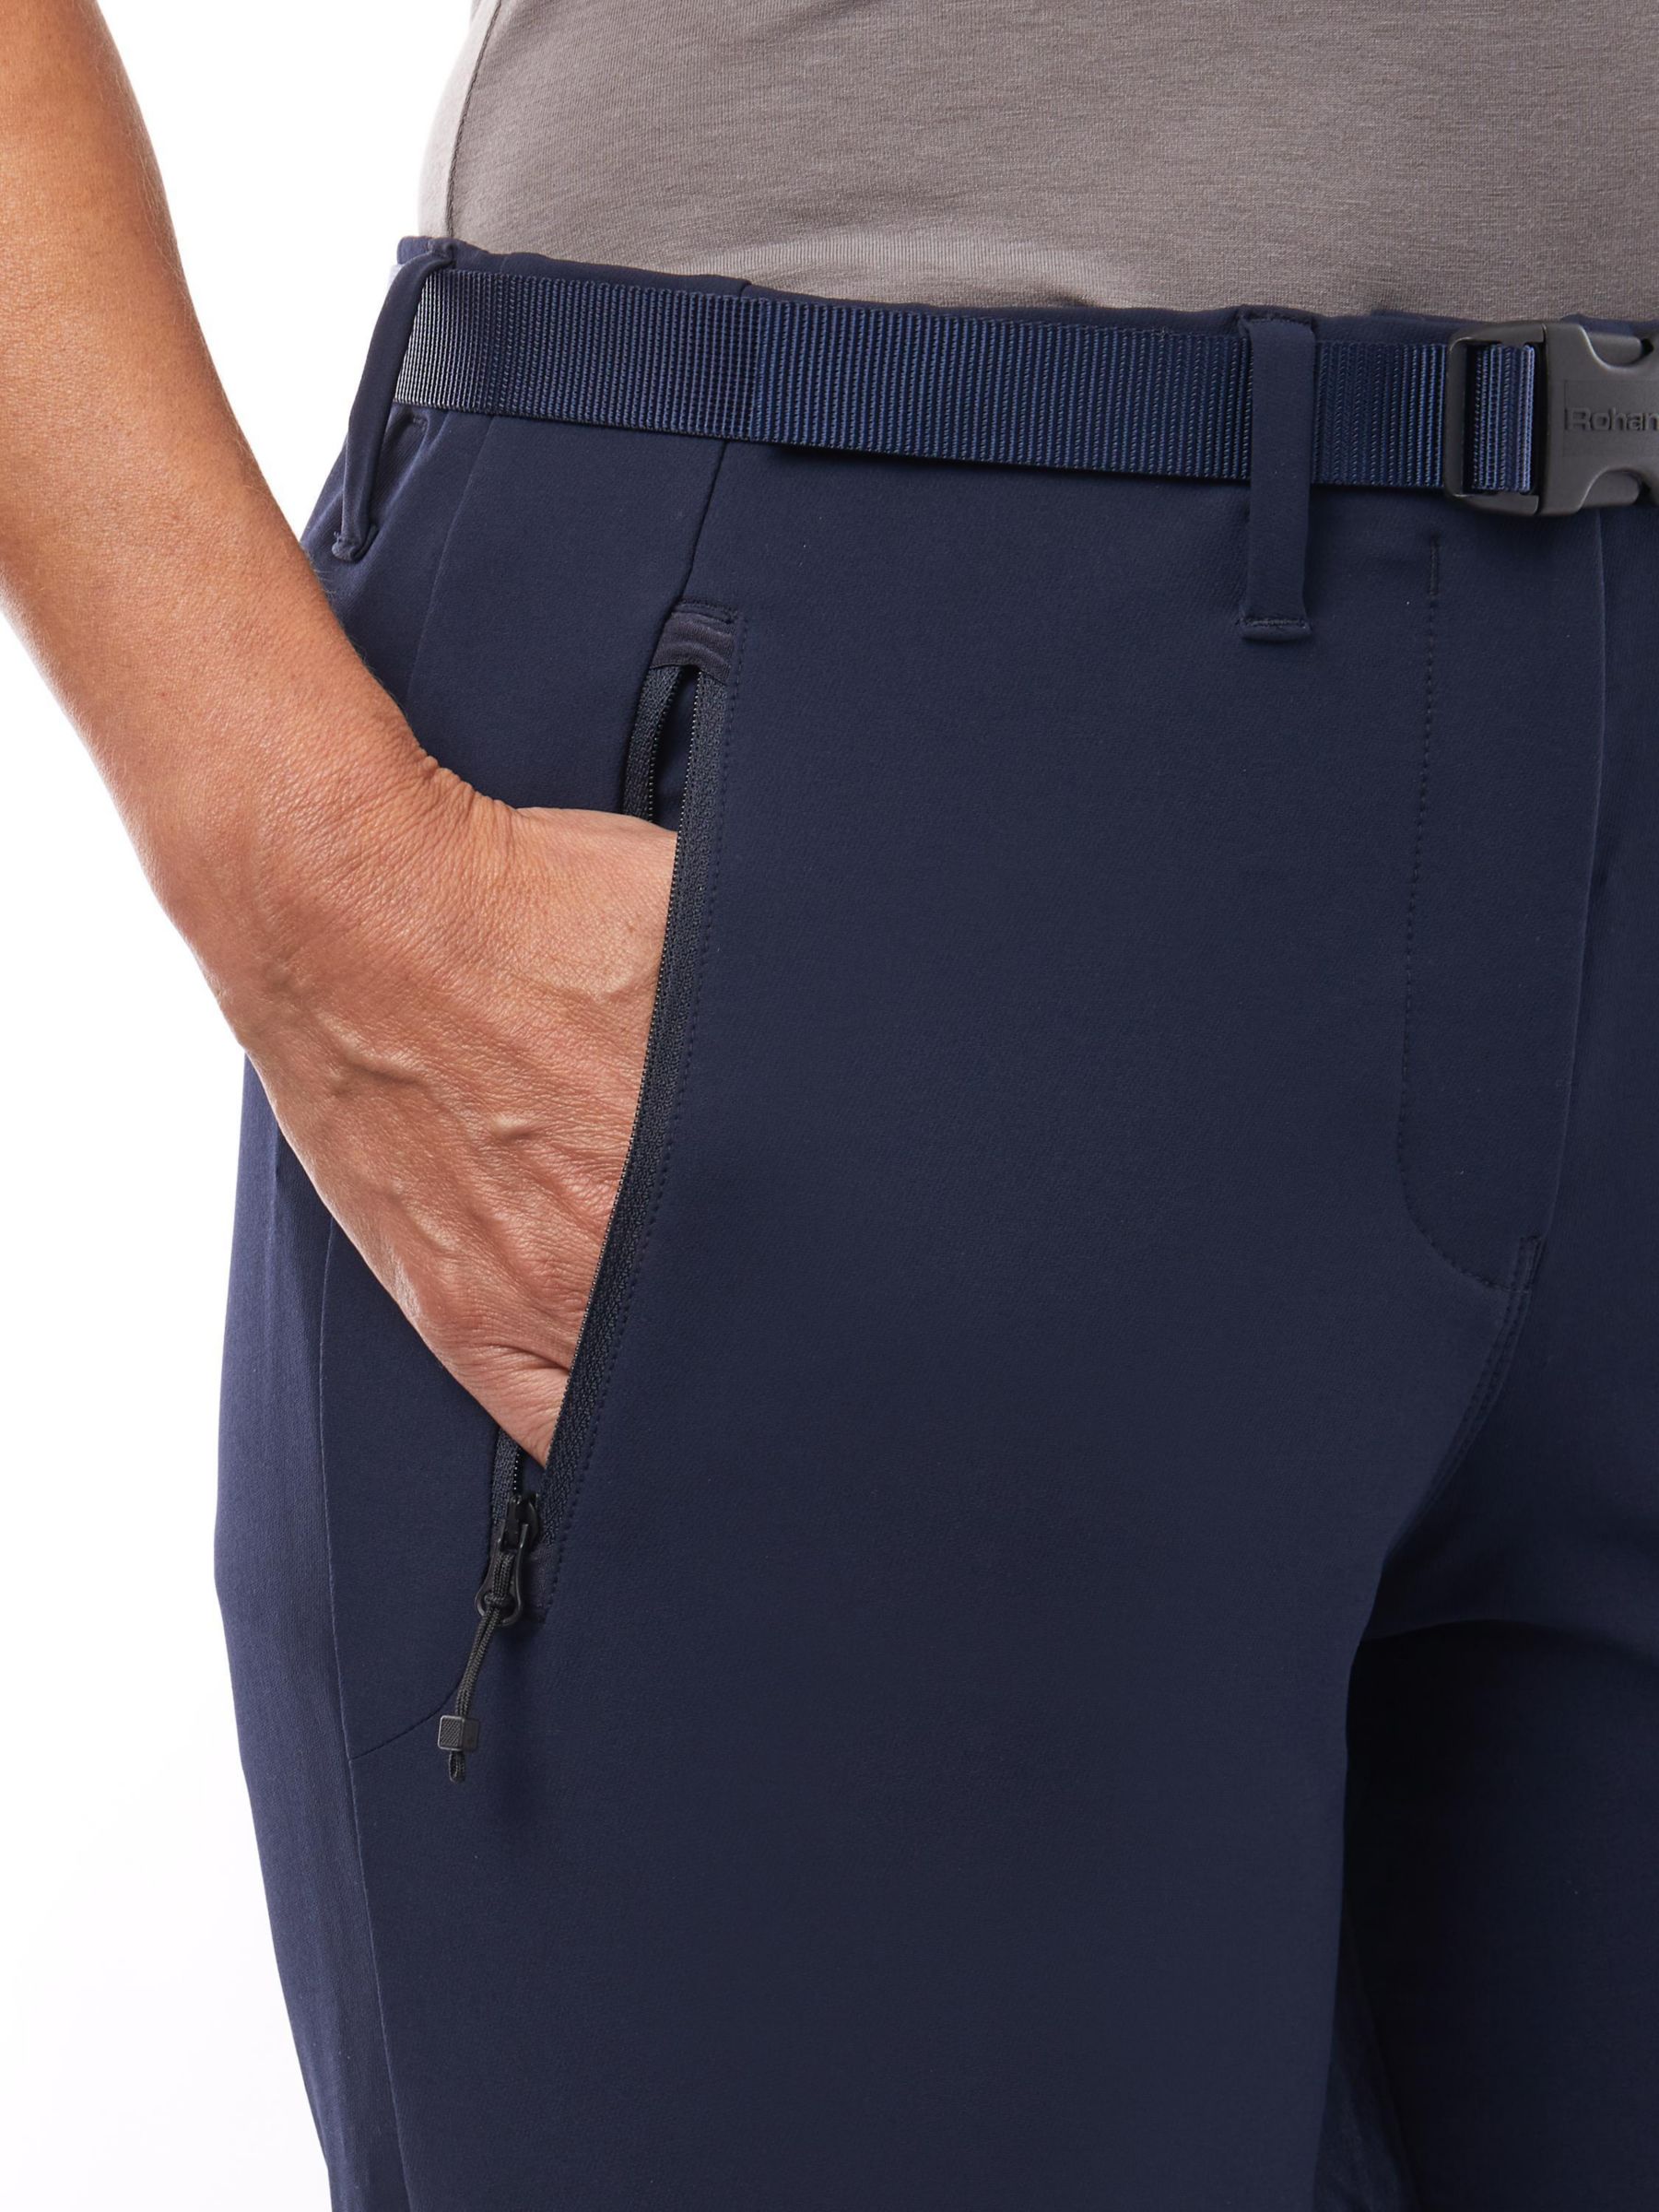 Buy Rohan Striders Women's Hiking Trousers Online at johnlewis.com